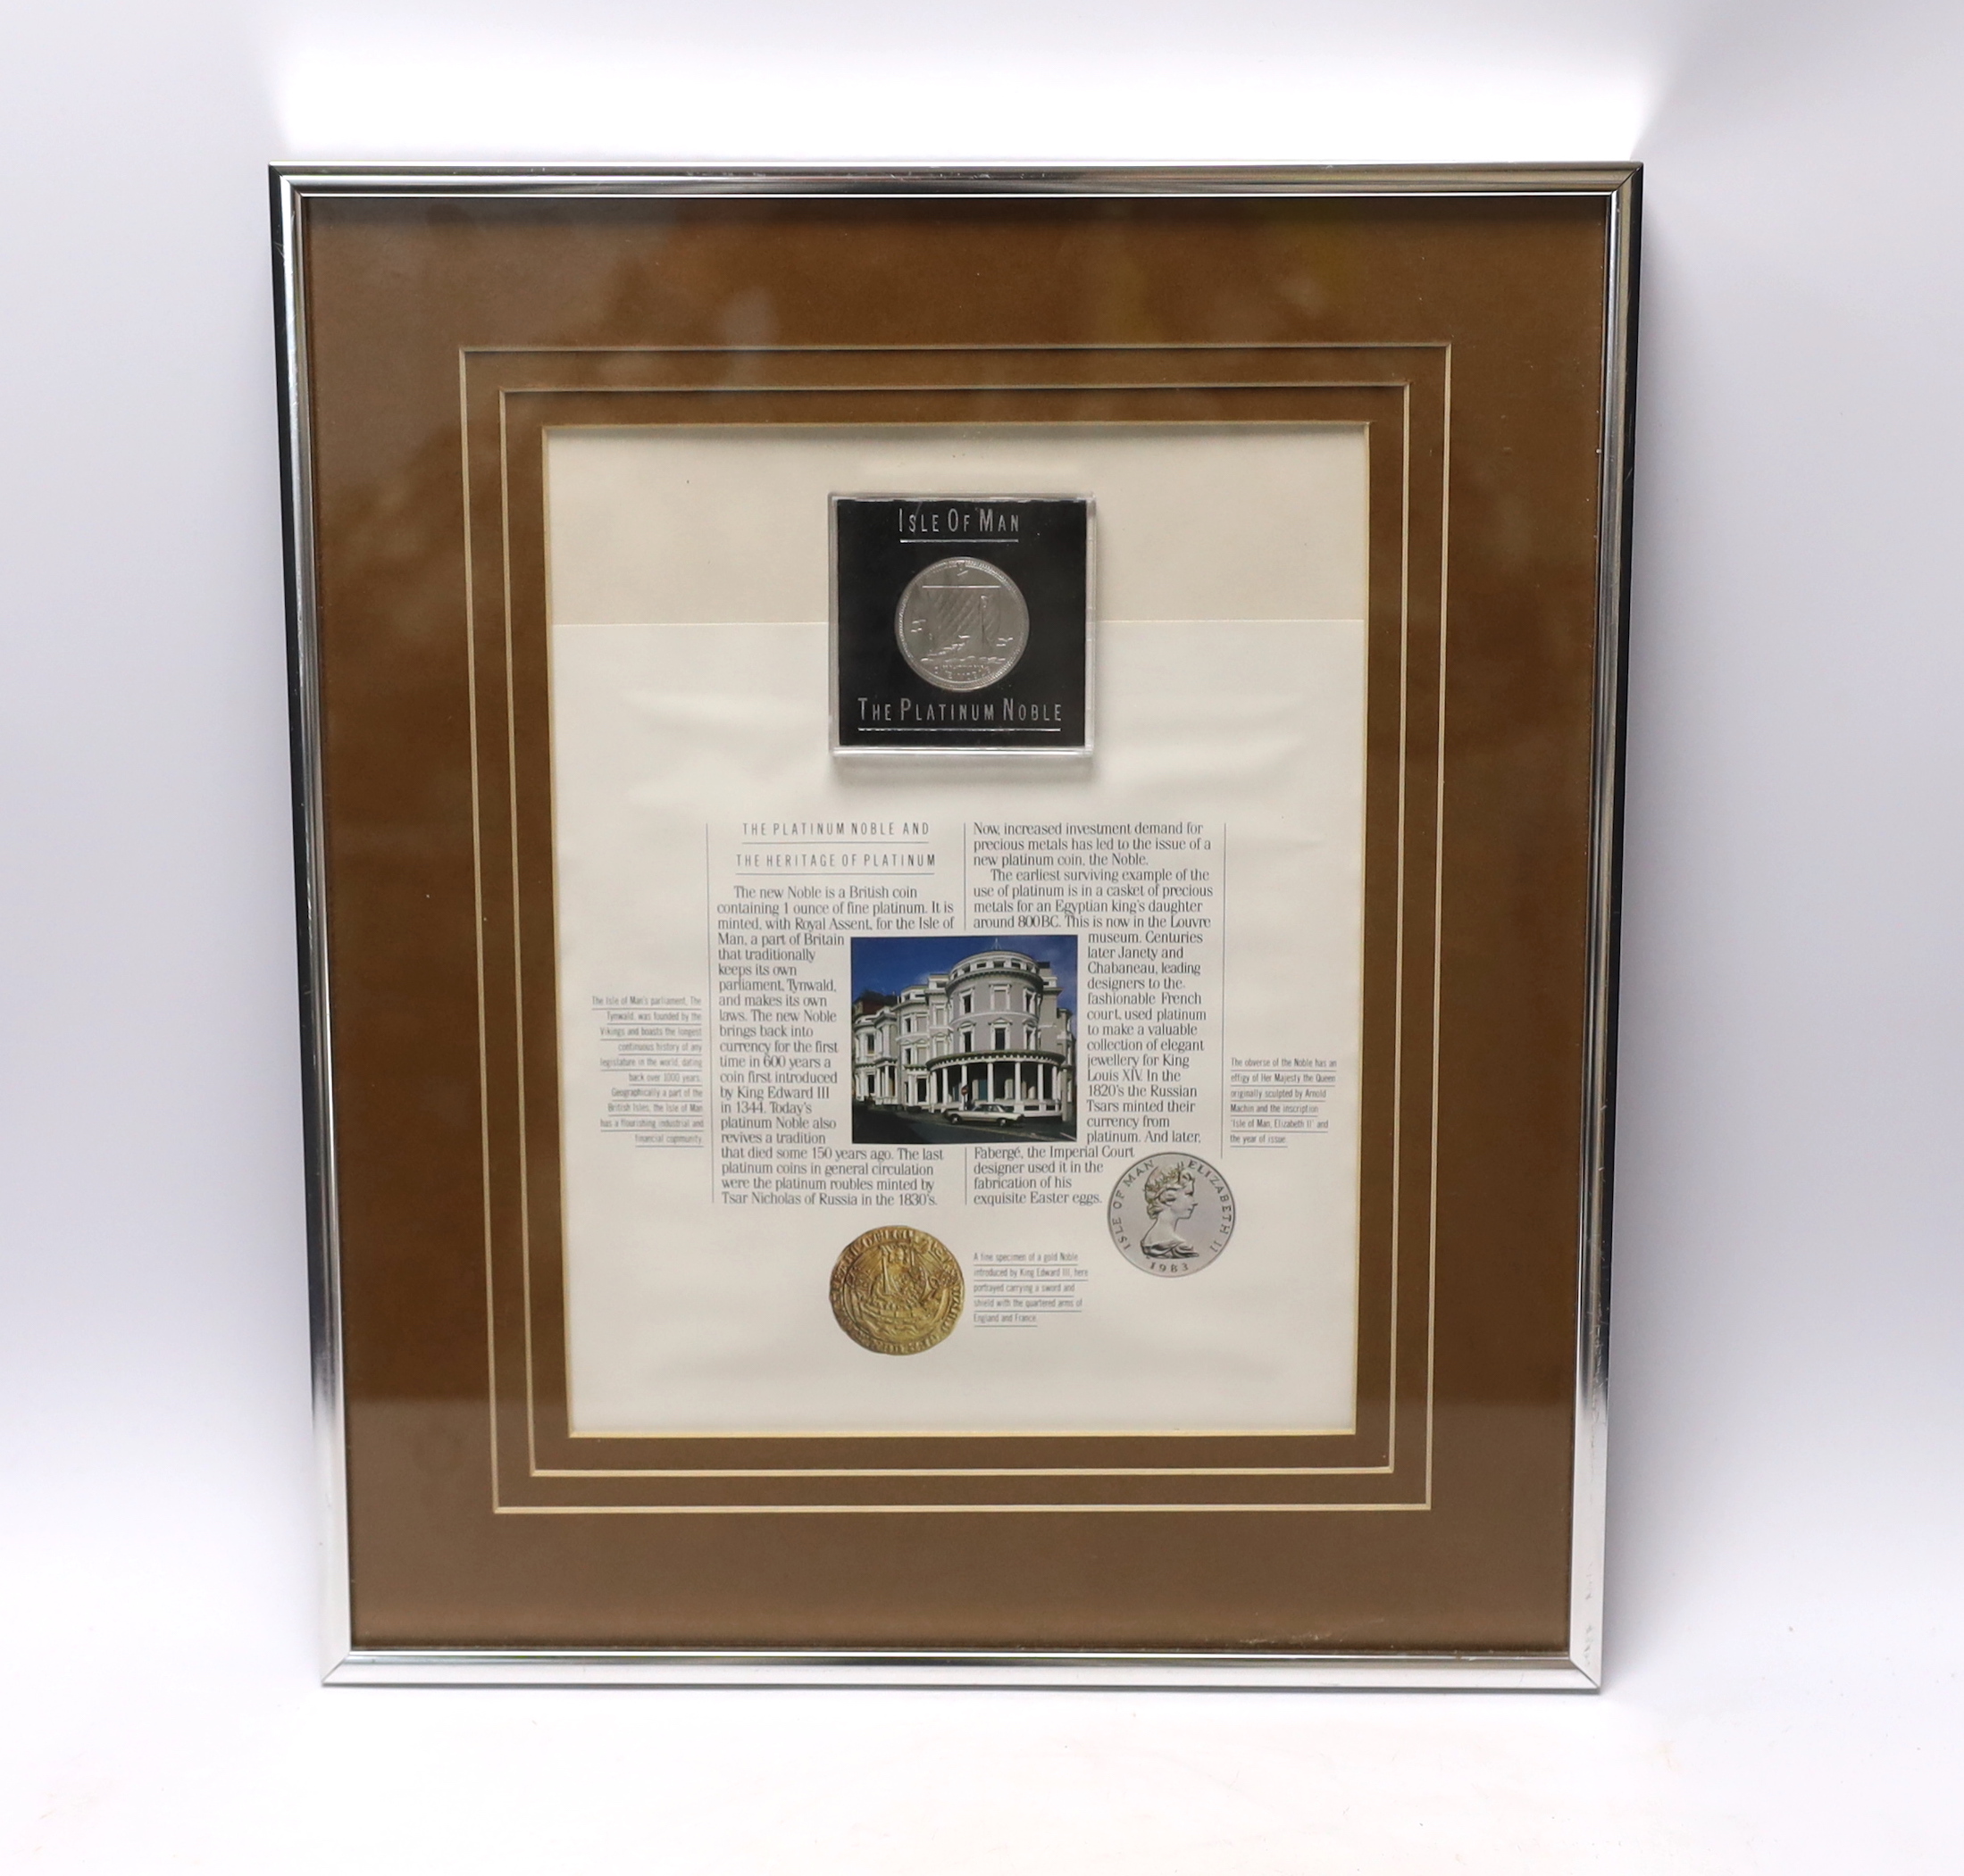 An Isle of Man 1oz. platinum one noble coin, framed display, 19.5cm x 24cm not including mount or frame                                                                                                                     